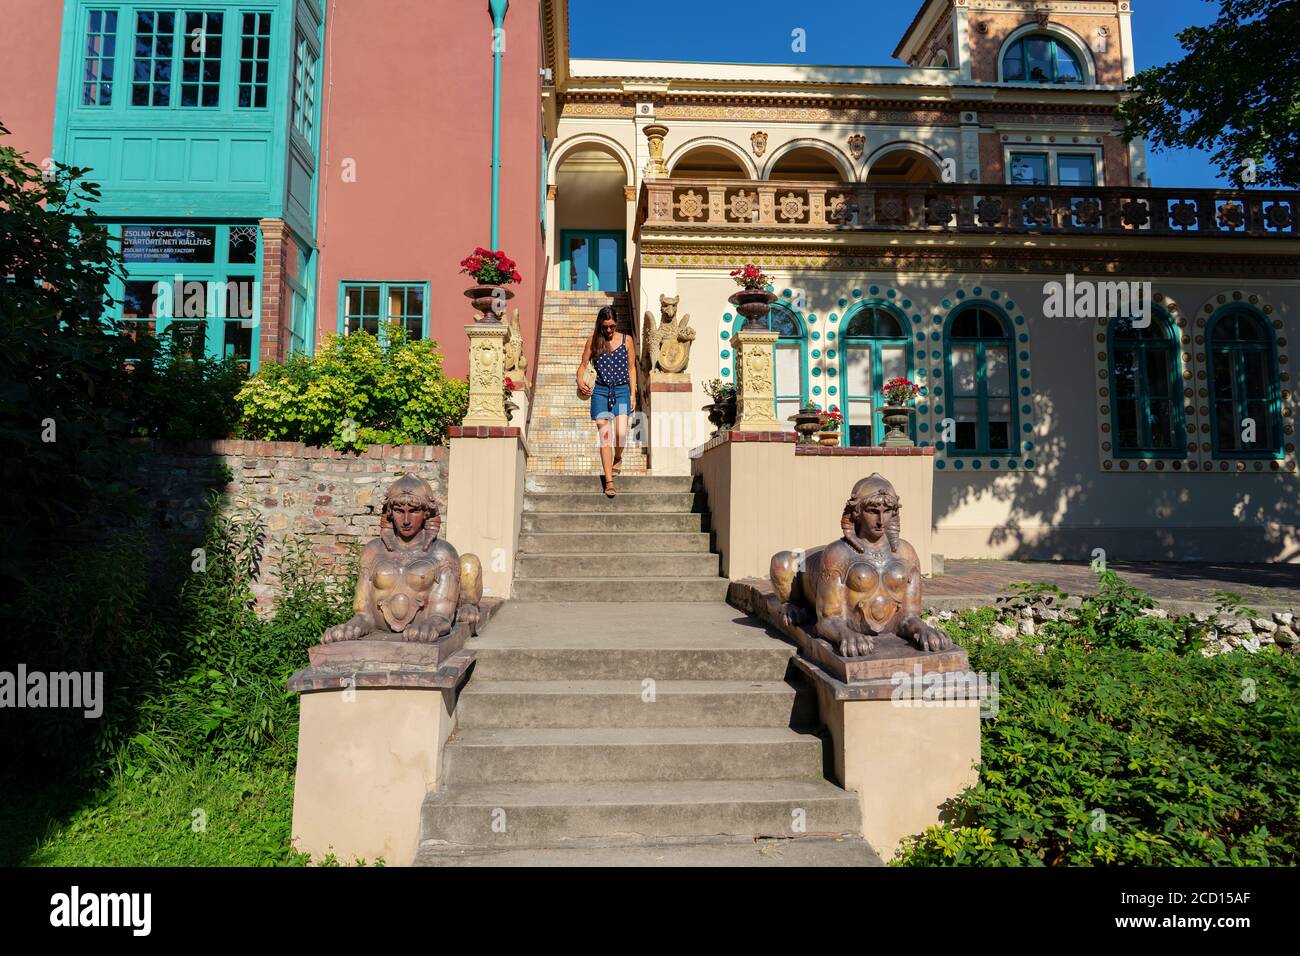 Pecs, Hungary - 21.08.2020: Beautiful colorful building in the famous colorful Zsolnay quarter in Pécs with a toursit woman Stock Photo